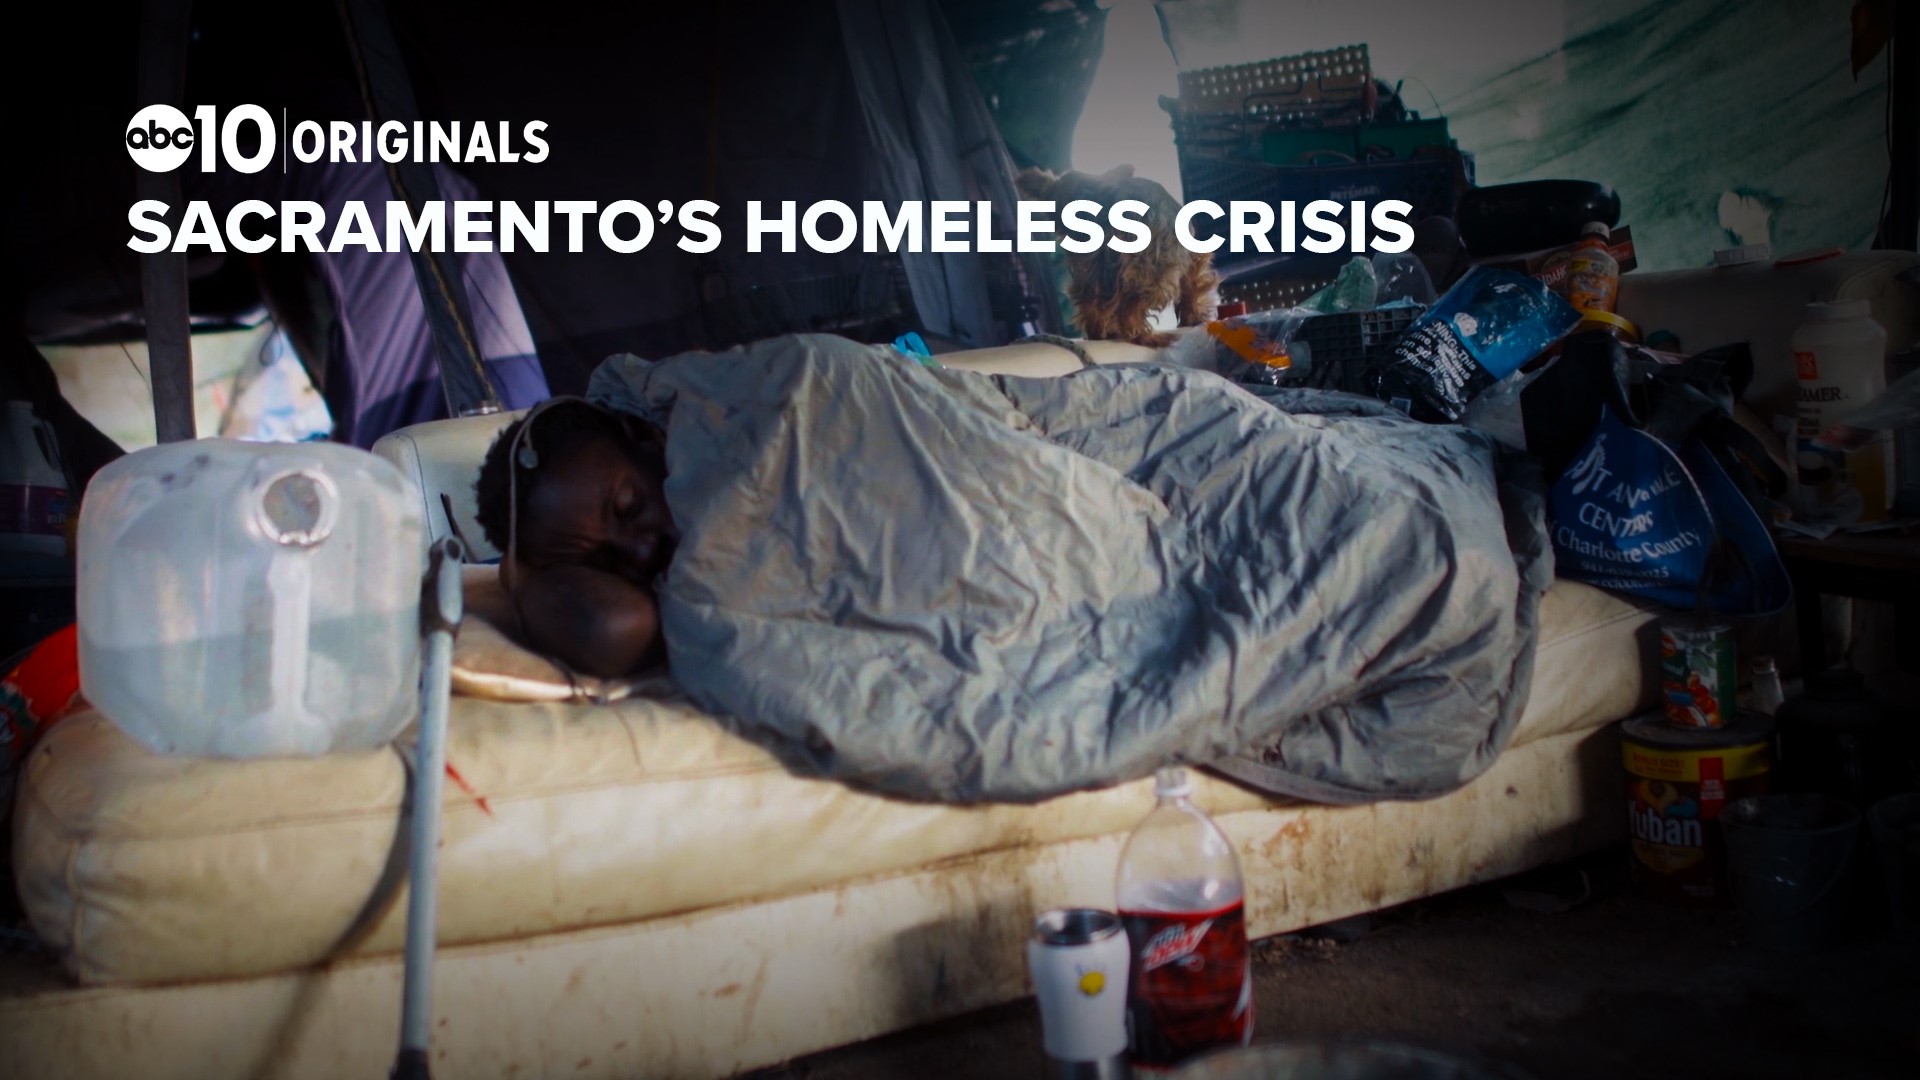 The homeless crisis in Sacramento is growing and our most vulnerable say they are left with few resources. We look into who is responsible.